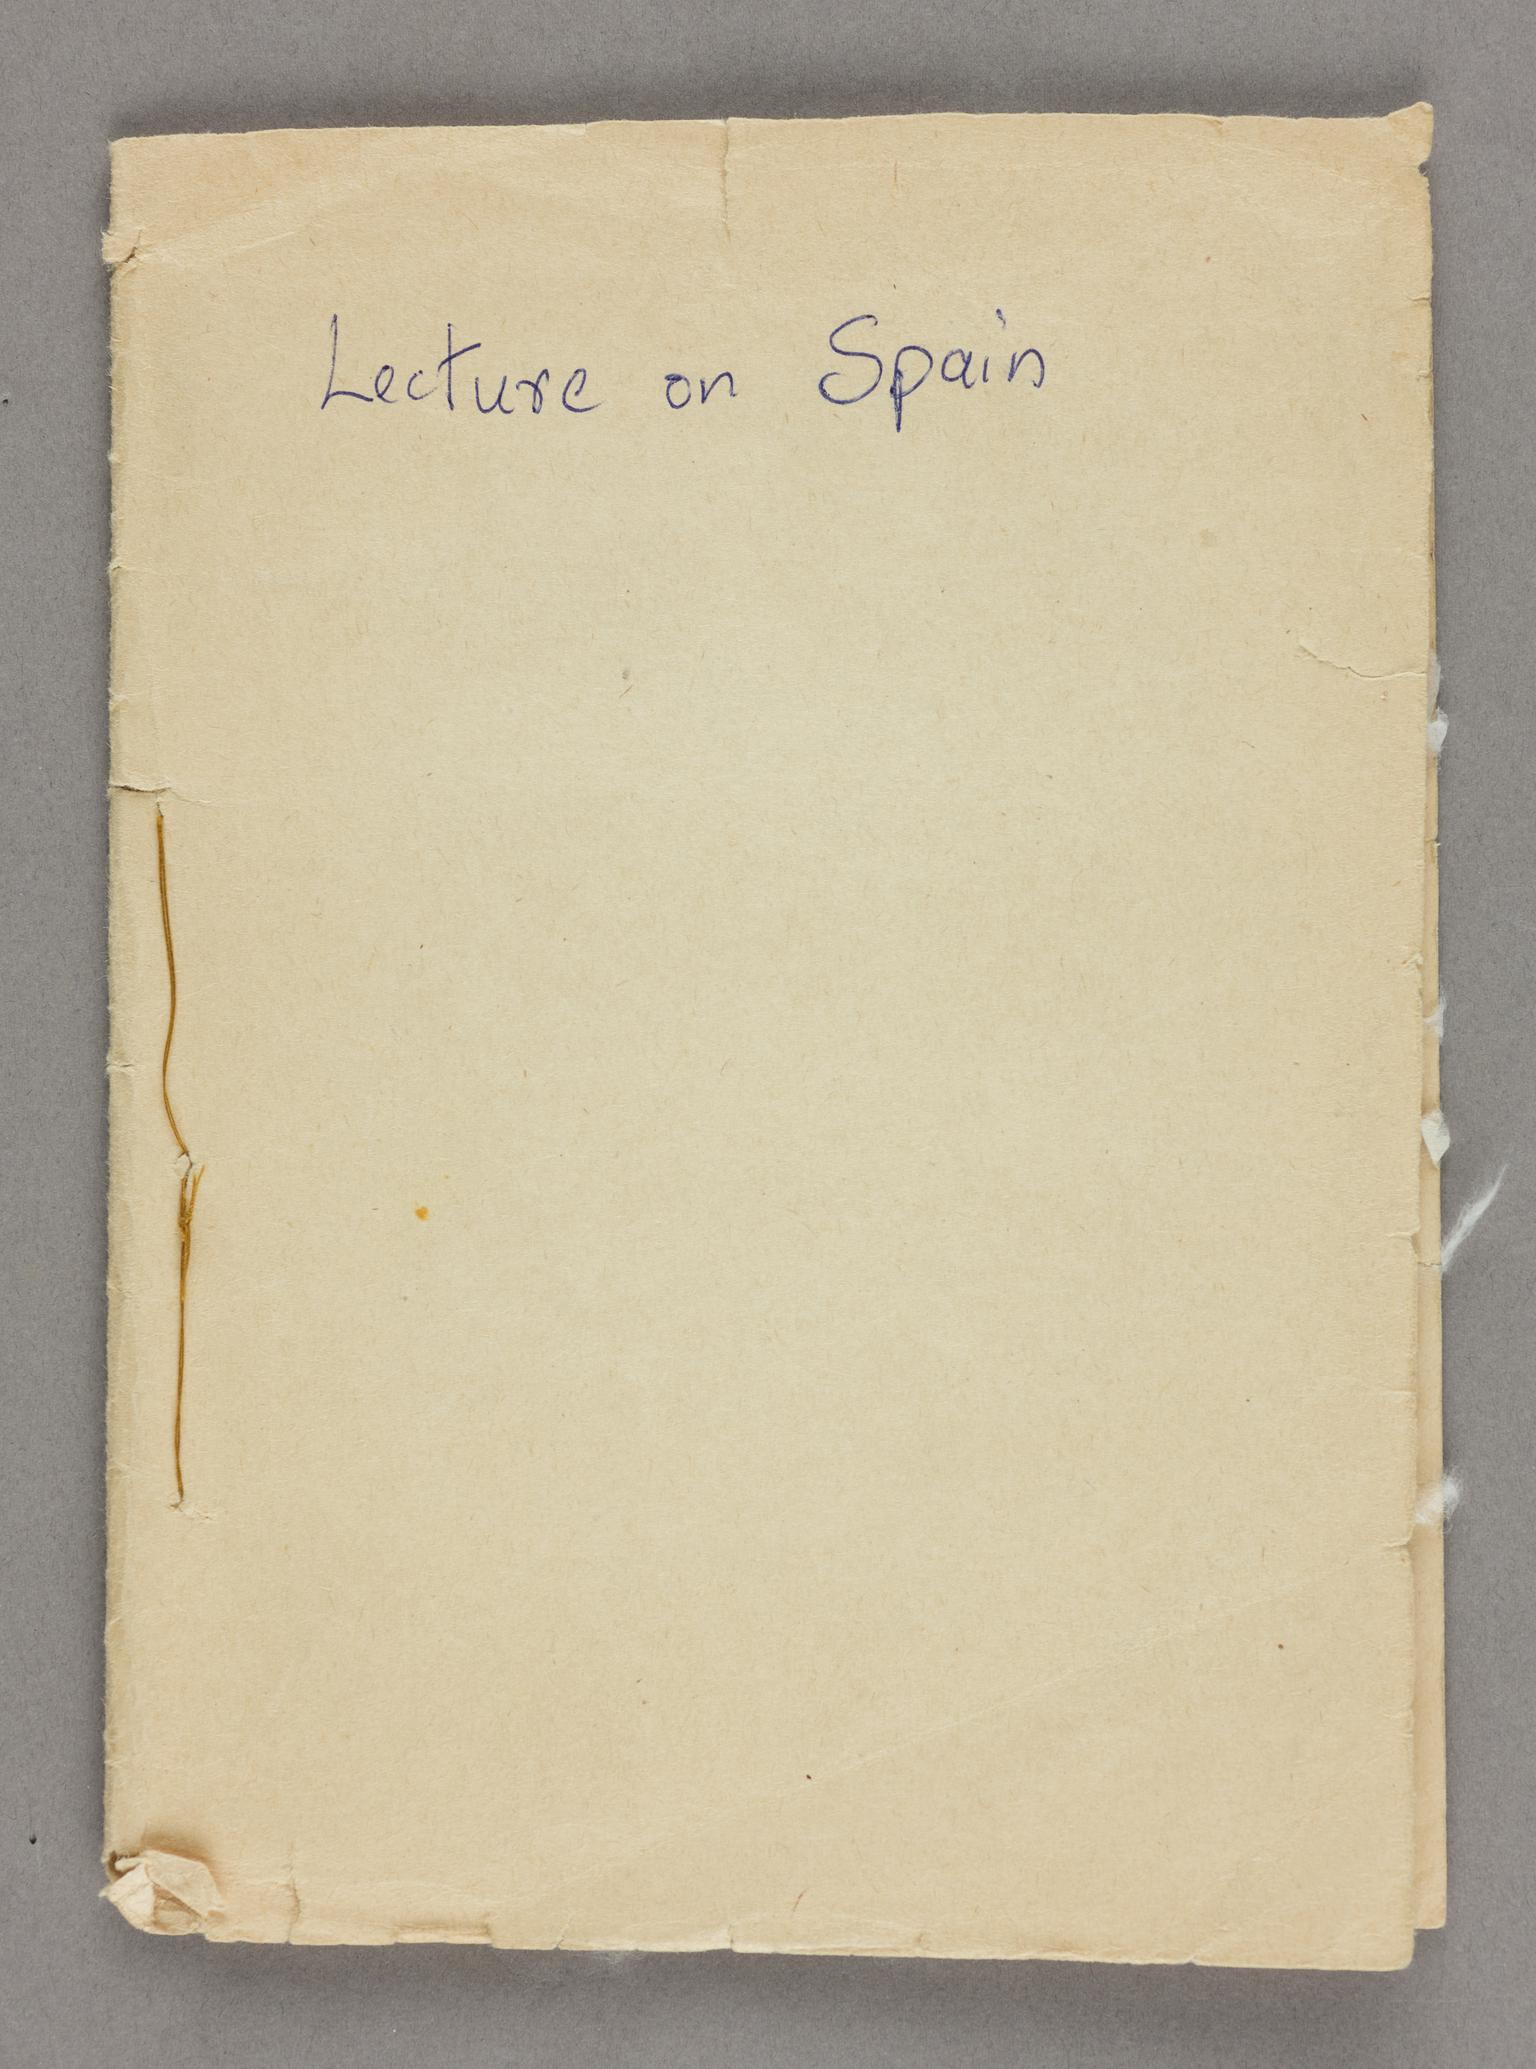 Lecture on Spain (lecture notes)